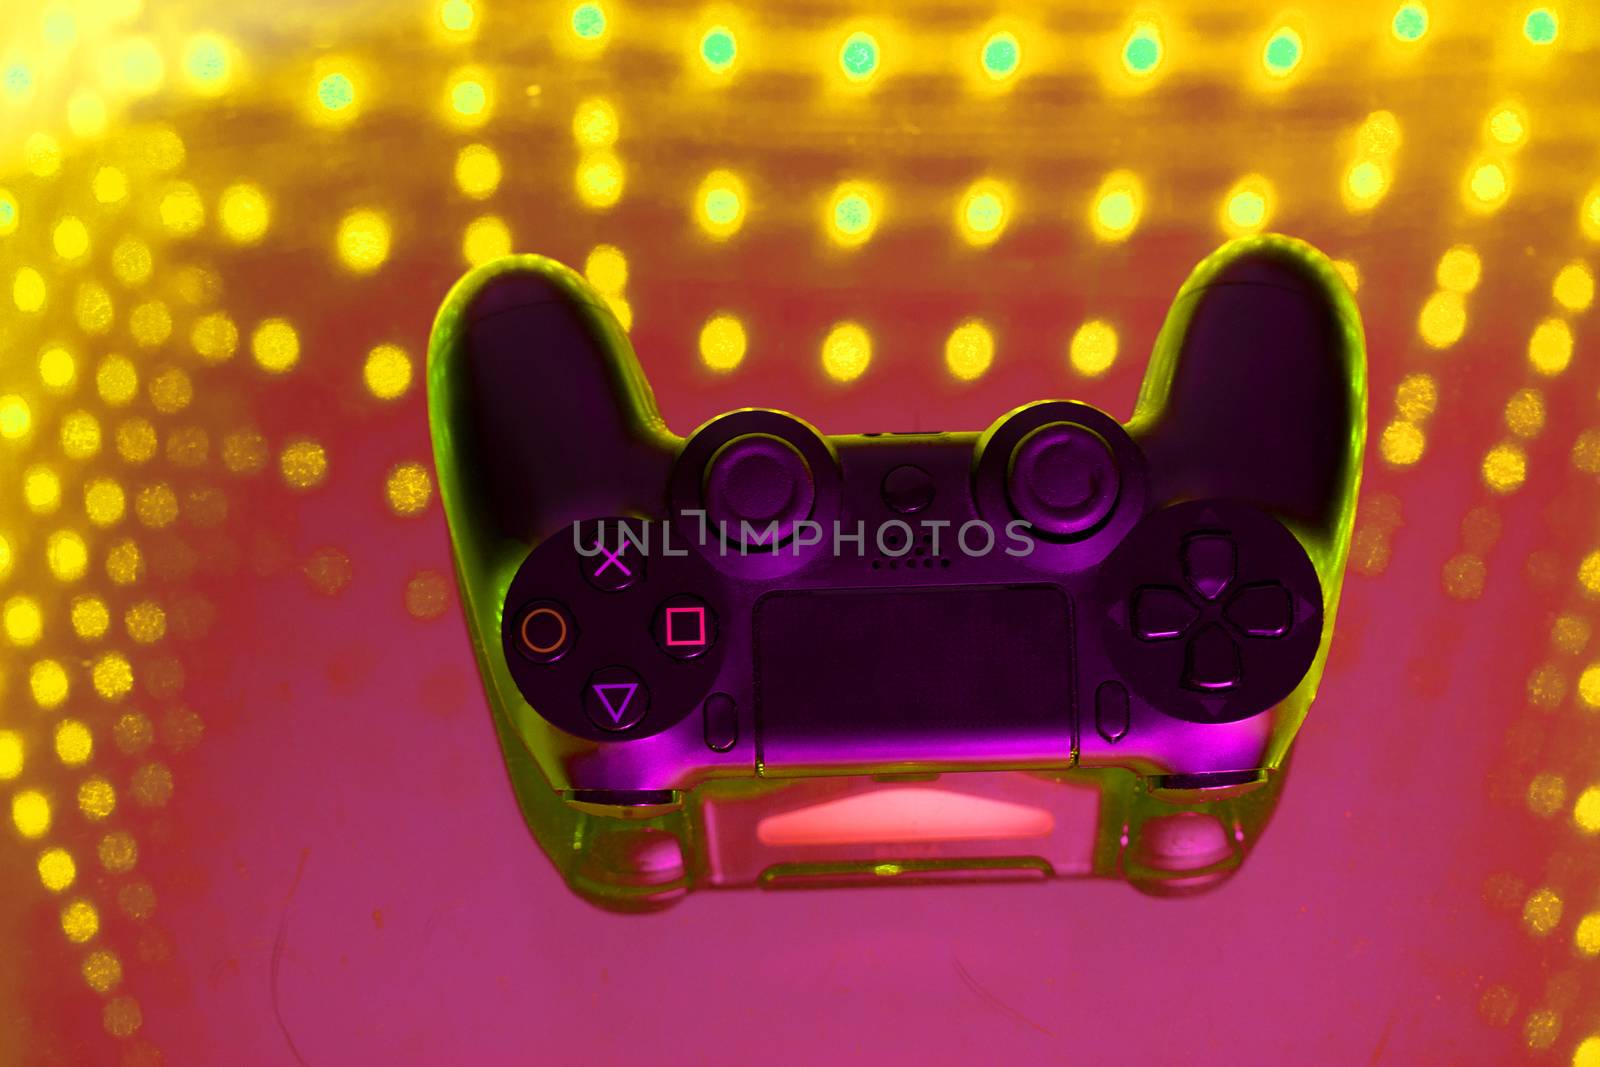 sony play station on illuminated table. game console